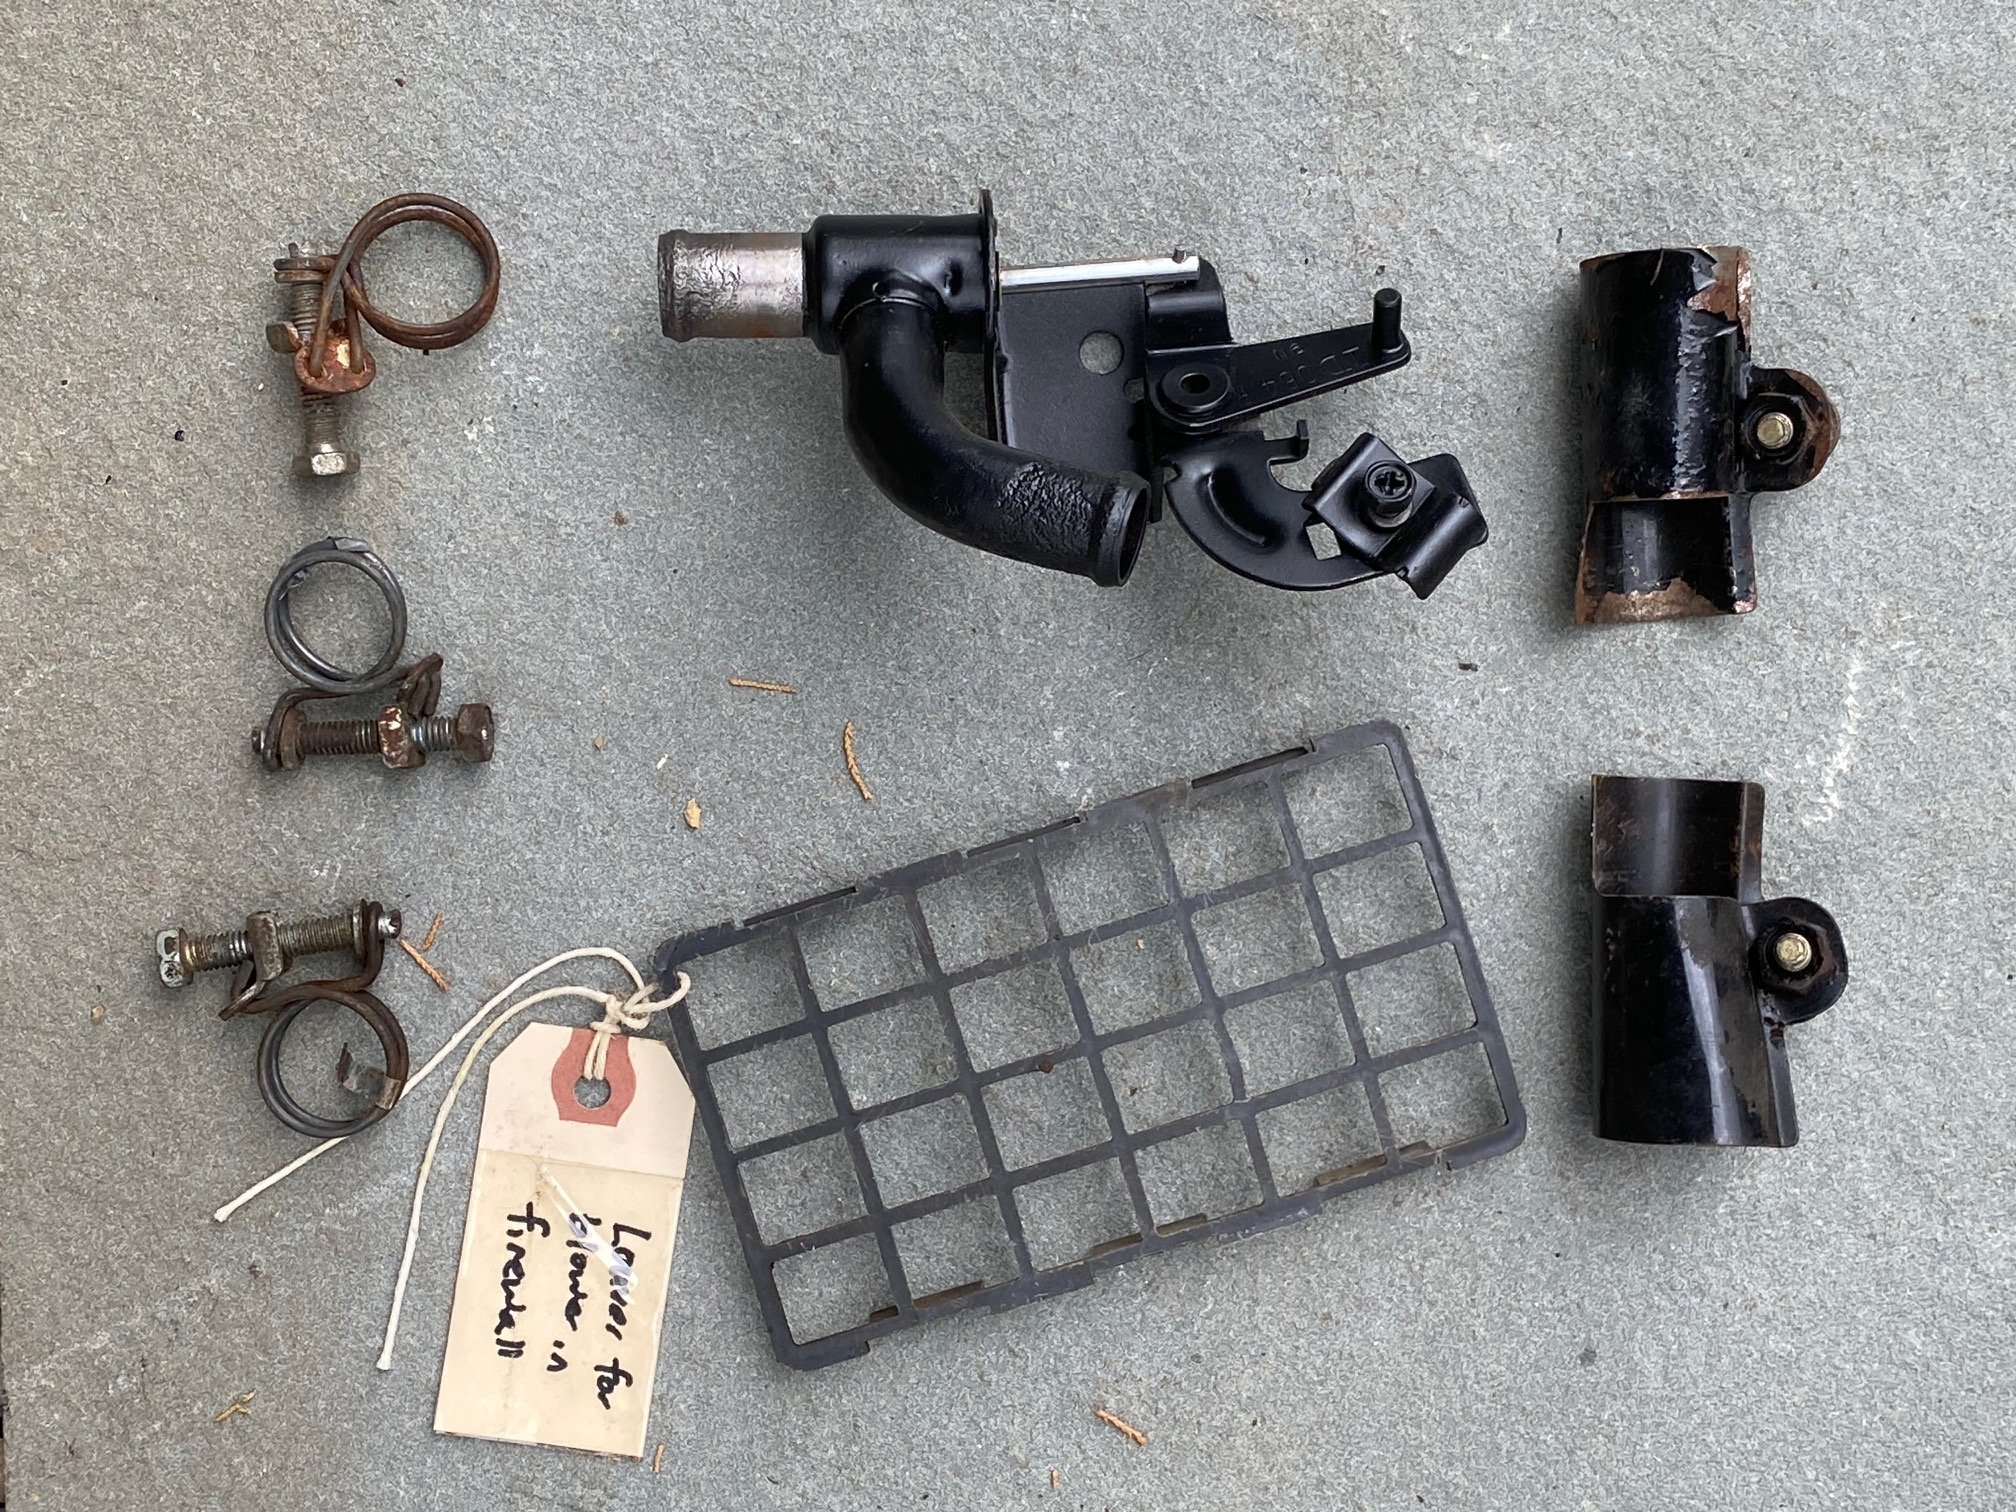 Heater valve and parts